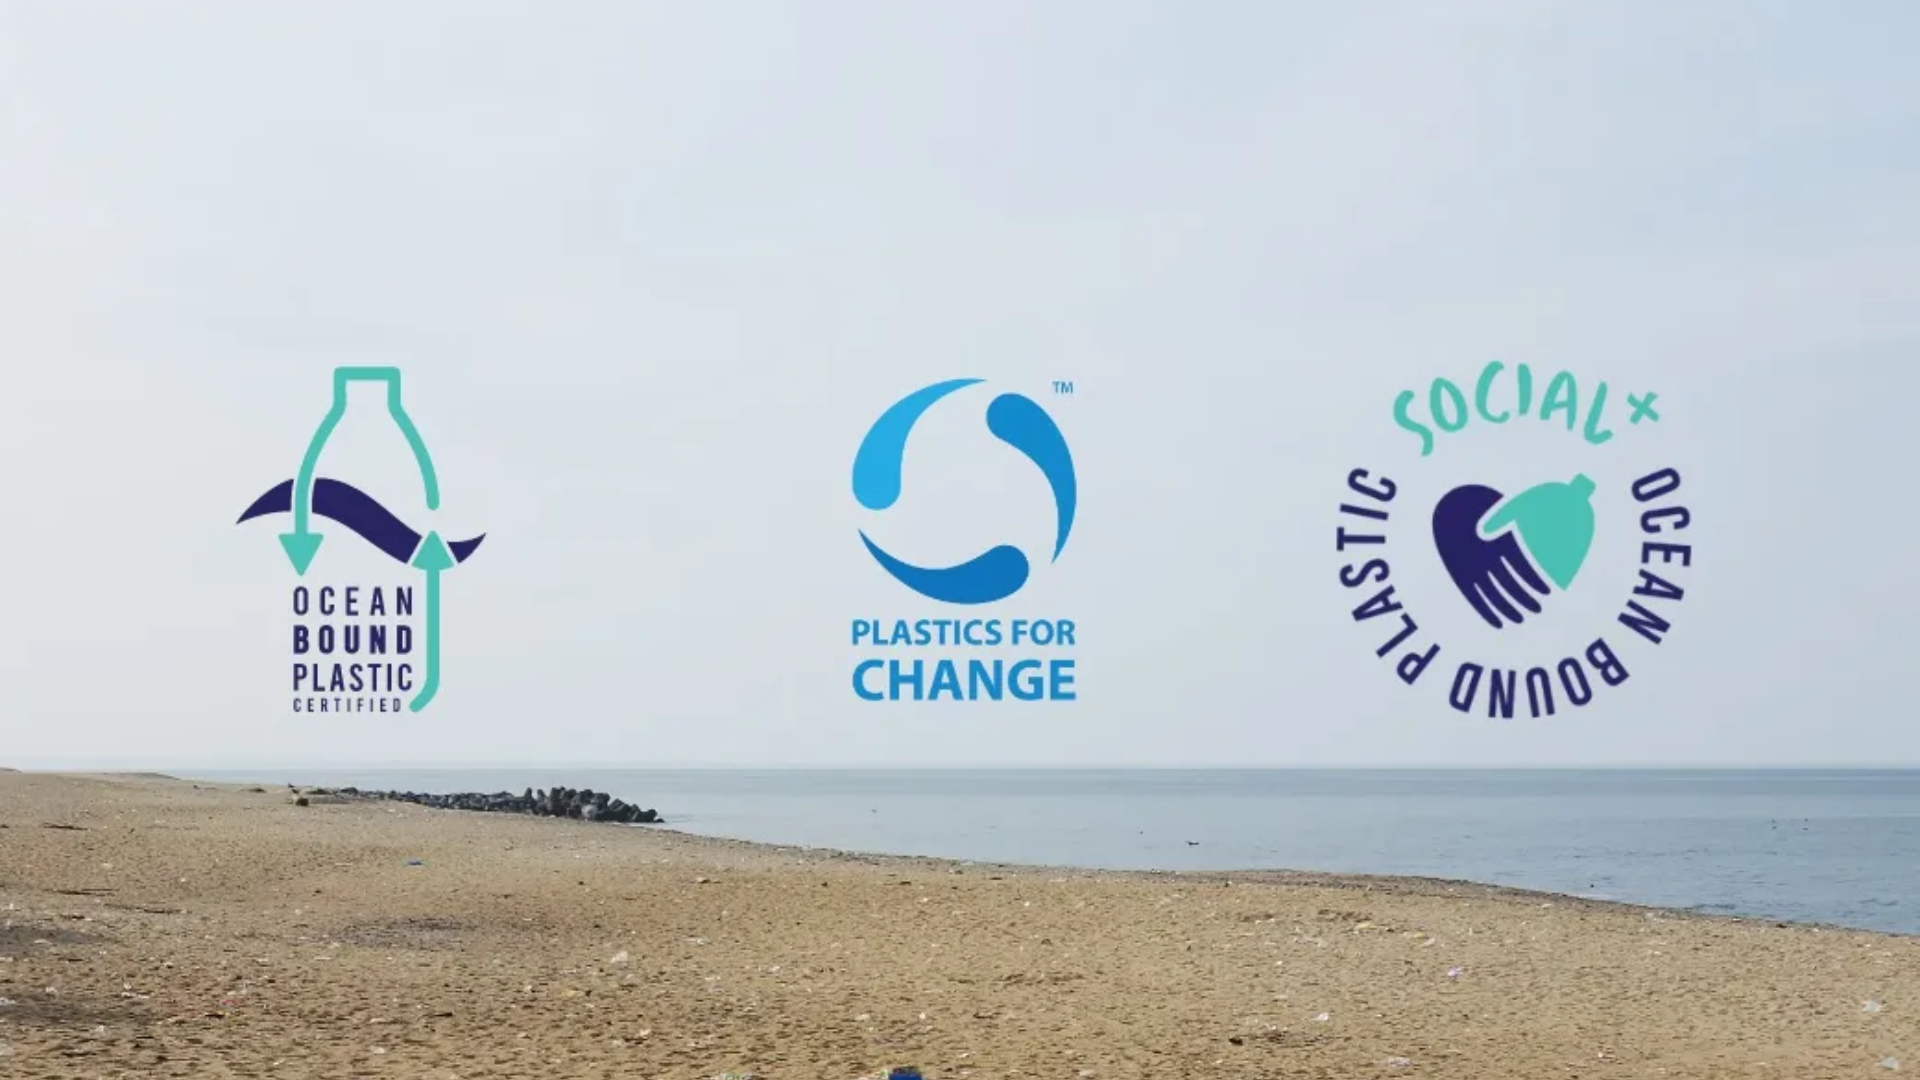 ‘Plastics For Change’ Makes History As First Recipient of Social+OBP Certification